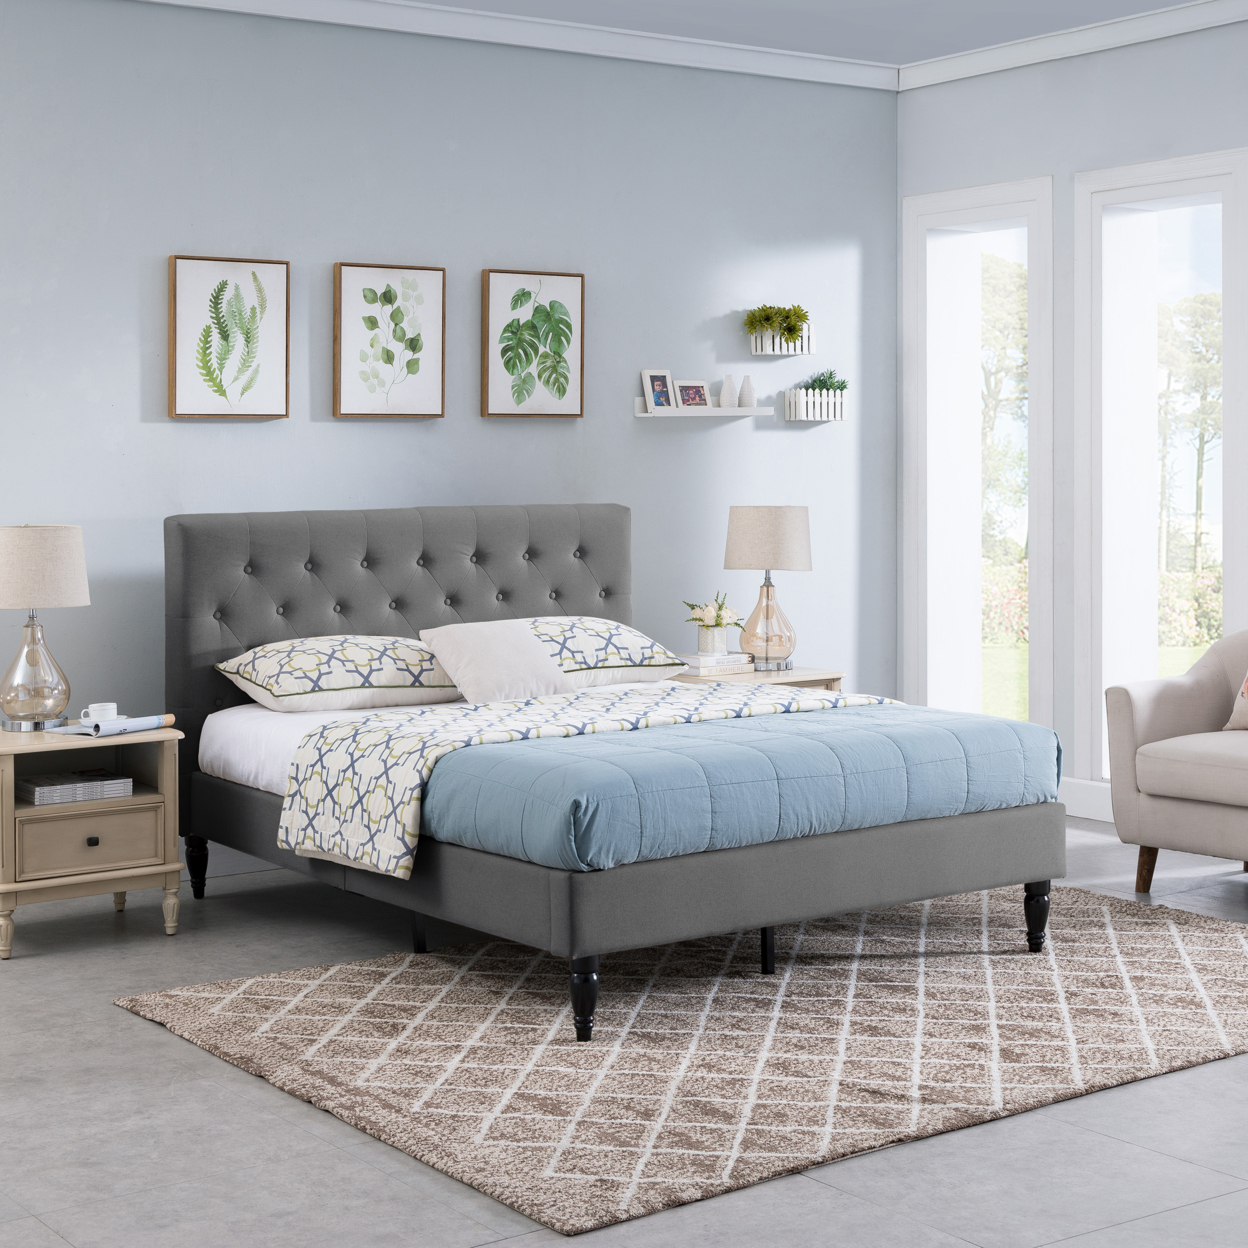 Agnes Fully-Upholstered Queen-Size Platform Bed Frame, Low-Profile, Contemporary - Charcoal Gray